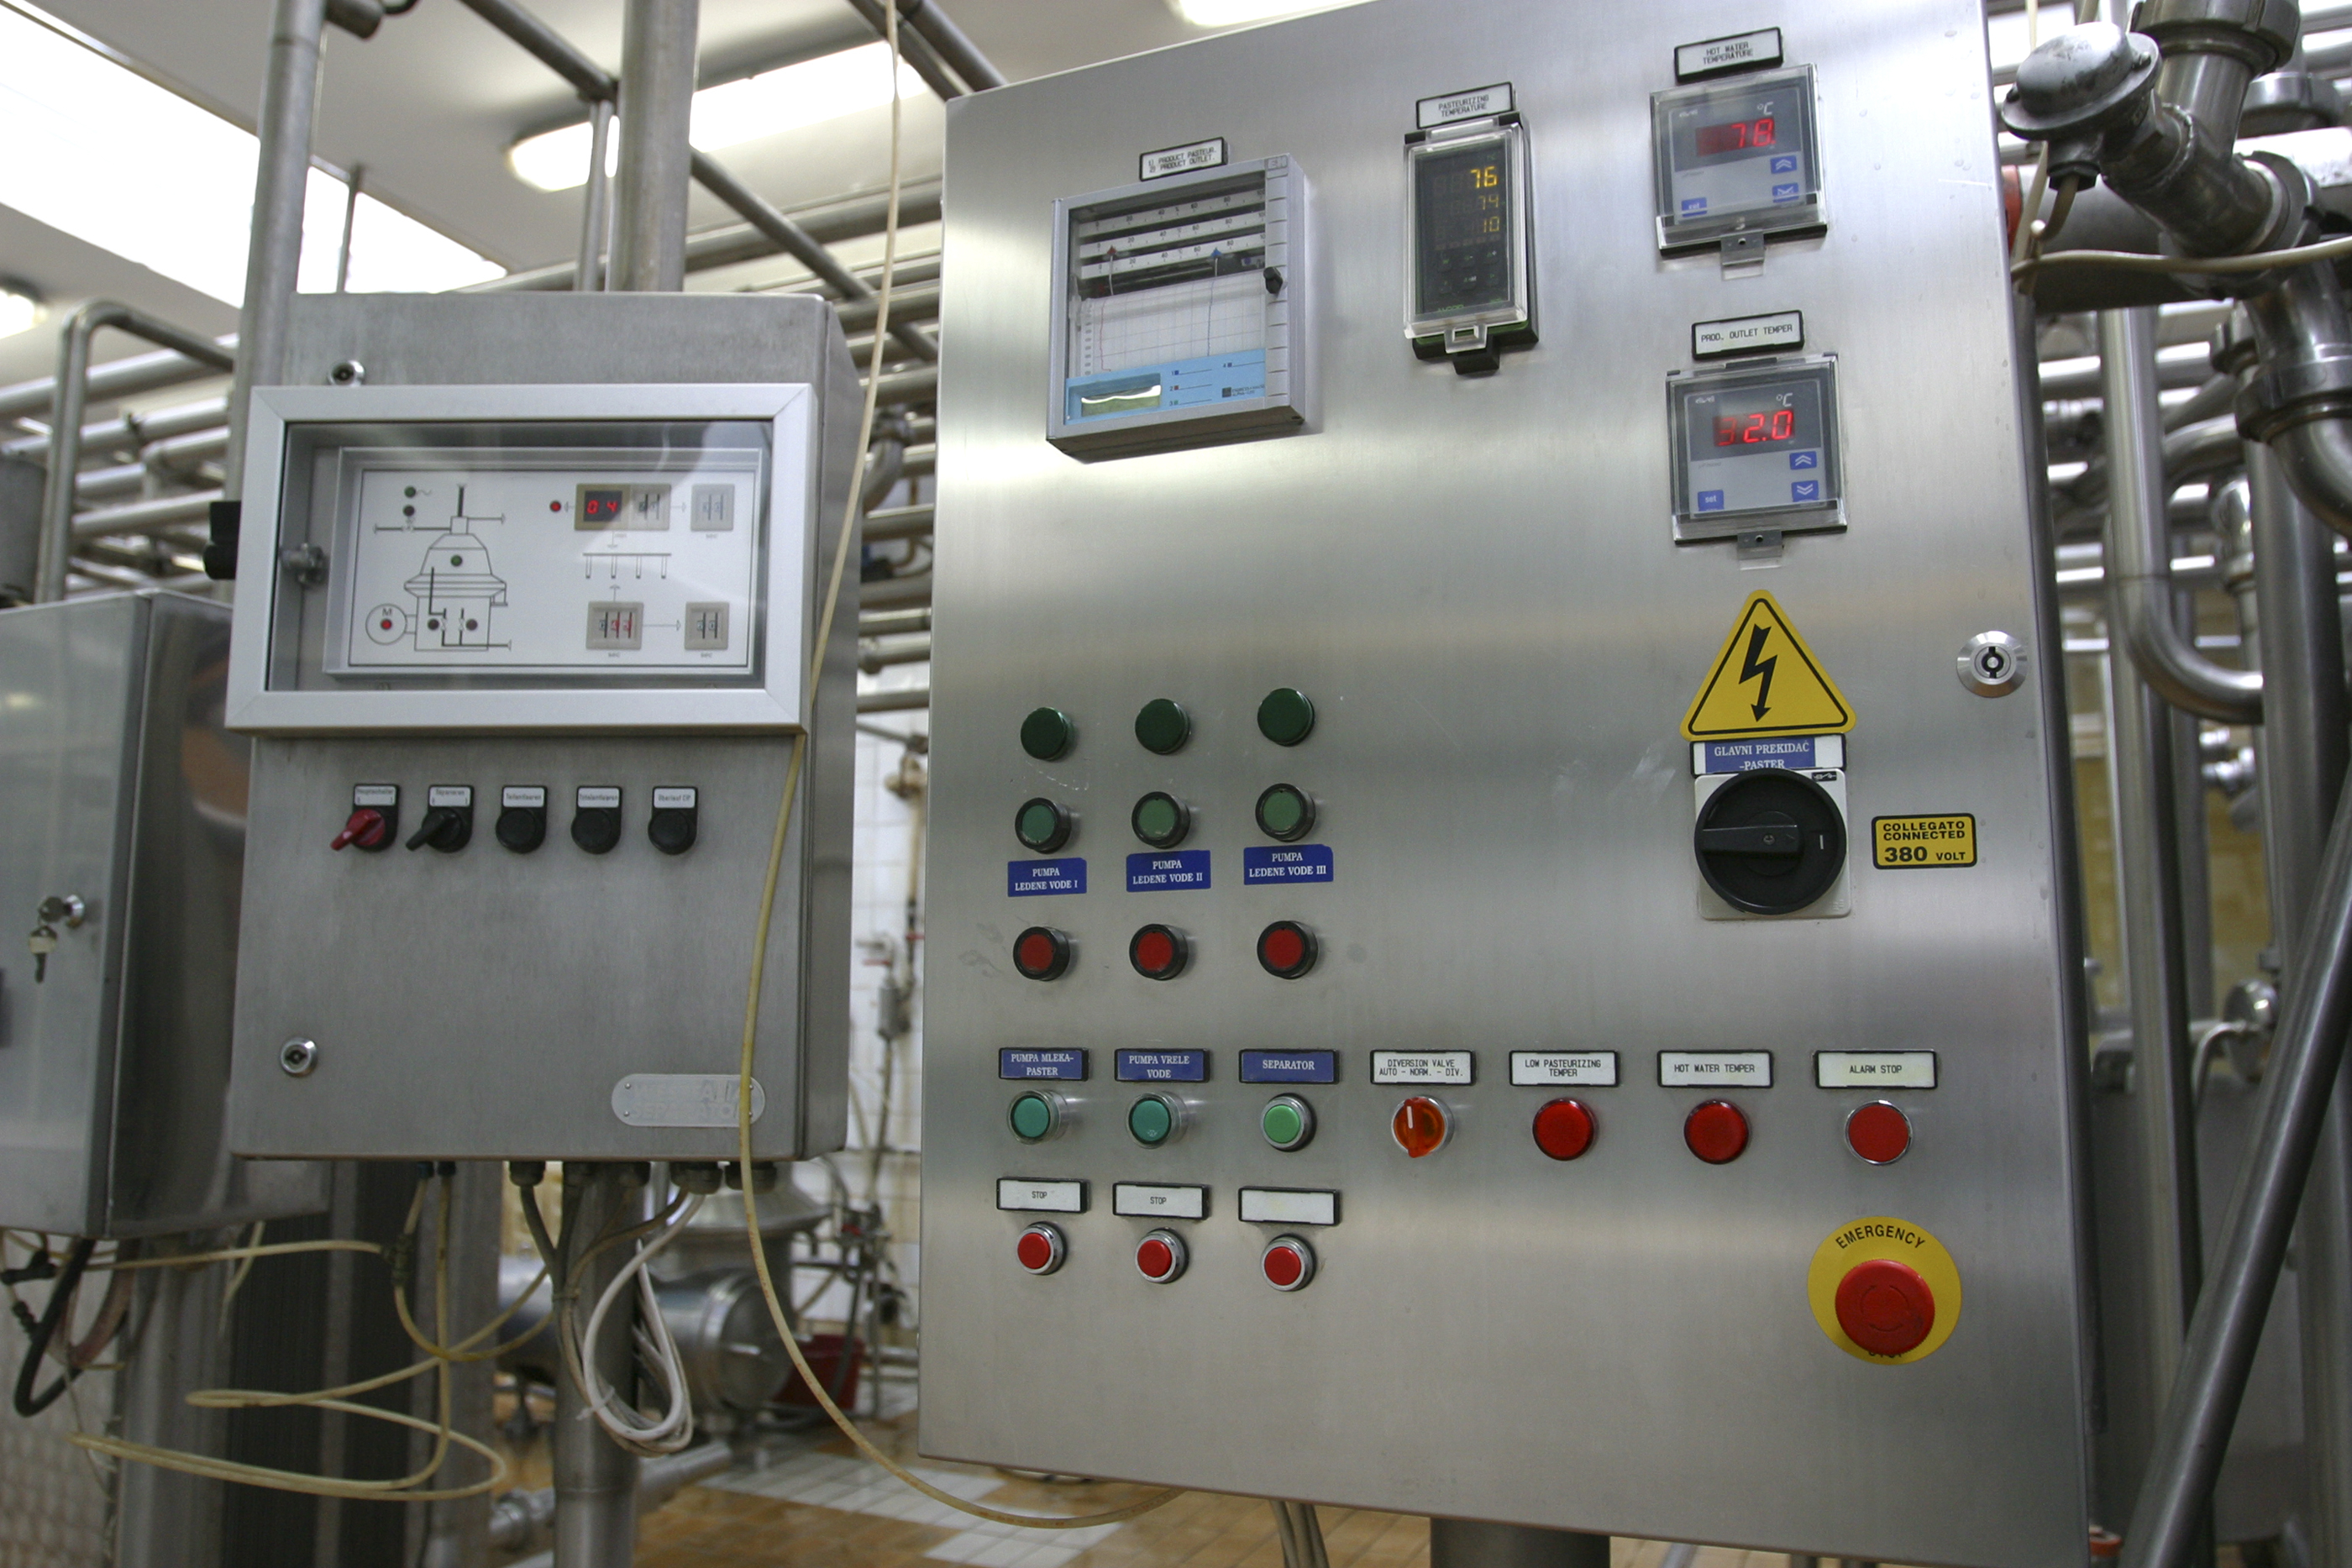 ATC Supervisor HMI module and MBrick controller can be used for process control applications